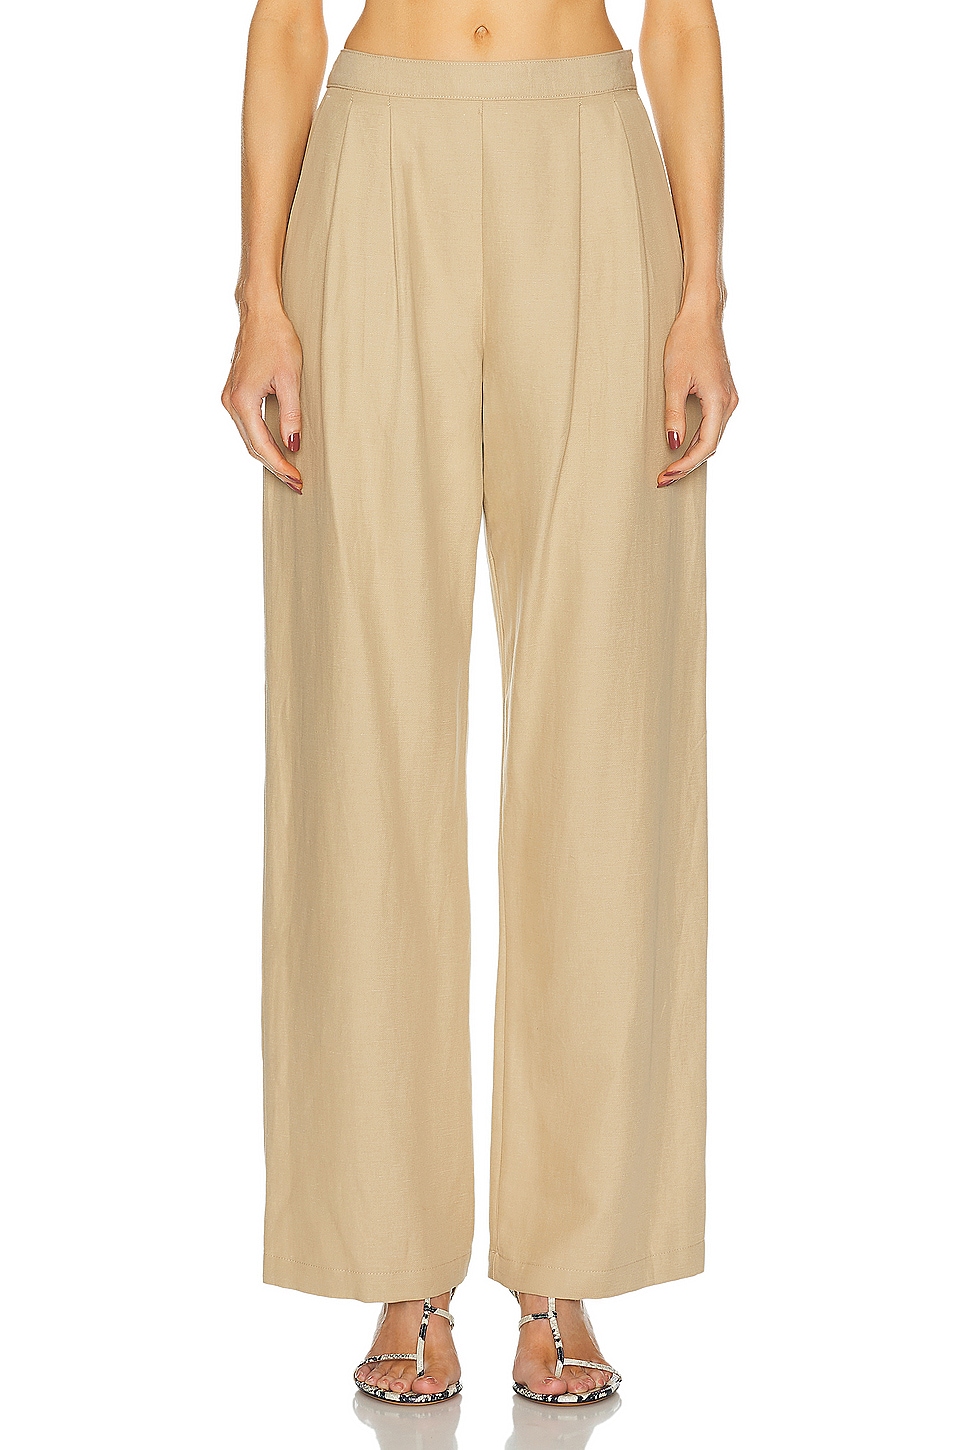 Image 1 of Enza Costa Twill Pleated Pant in Tan